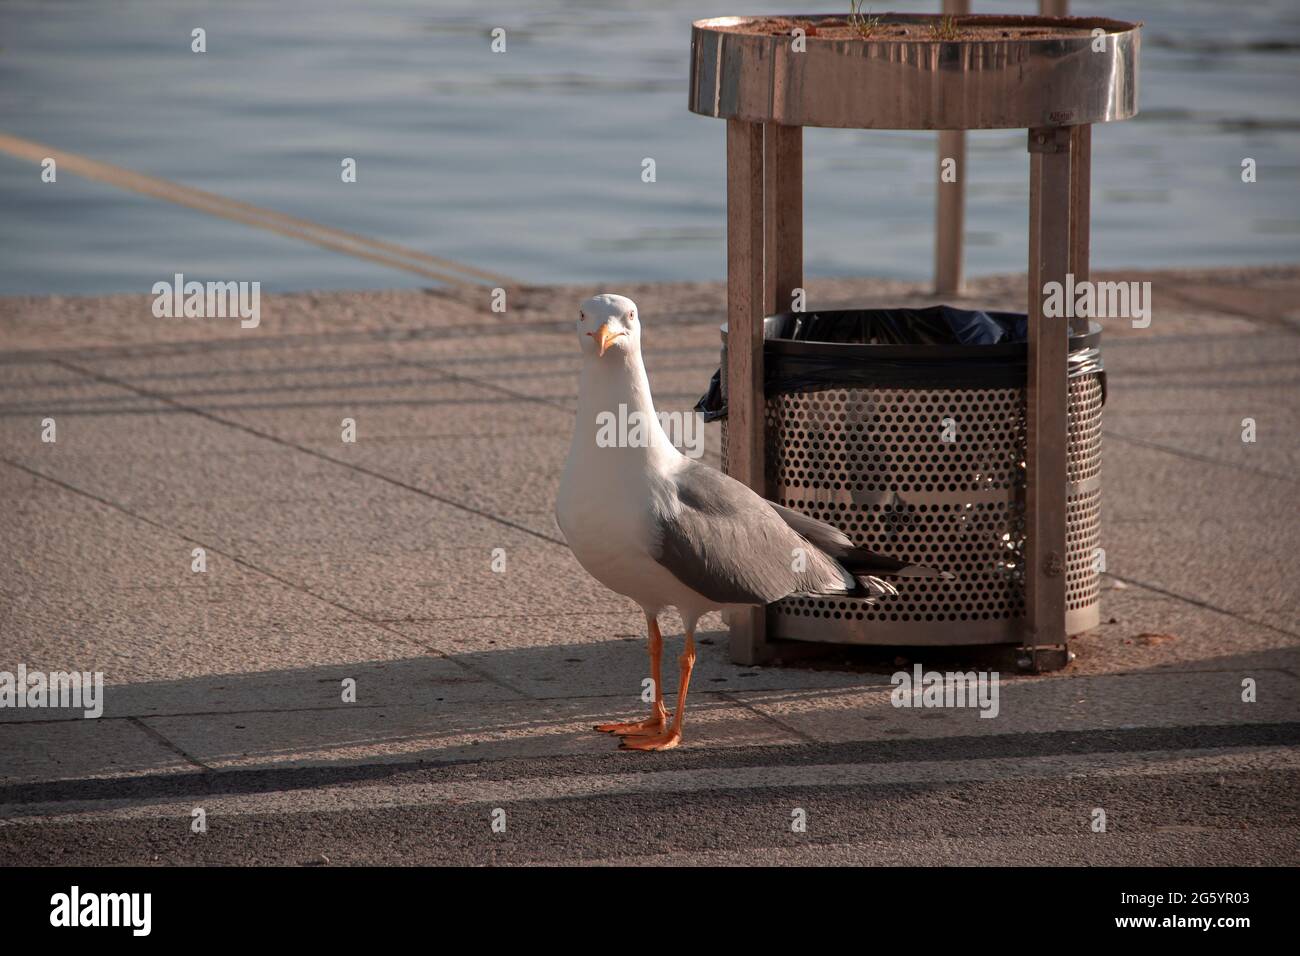 A seagull wandering around a trash can at sunset Stock Photo